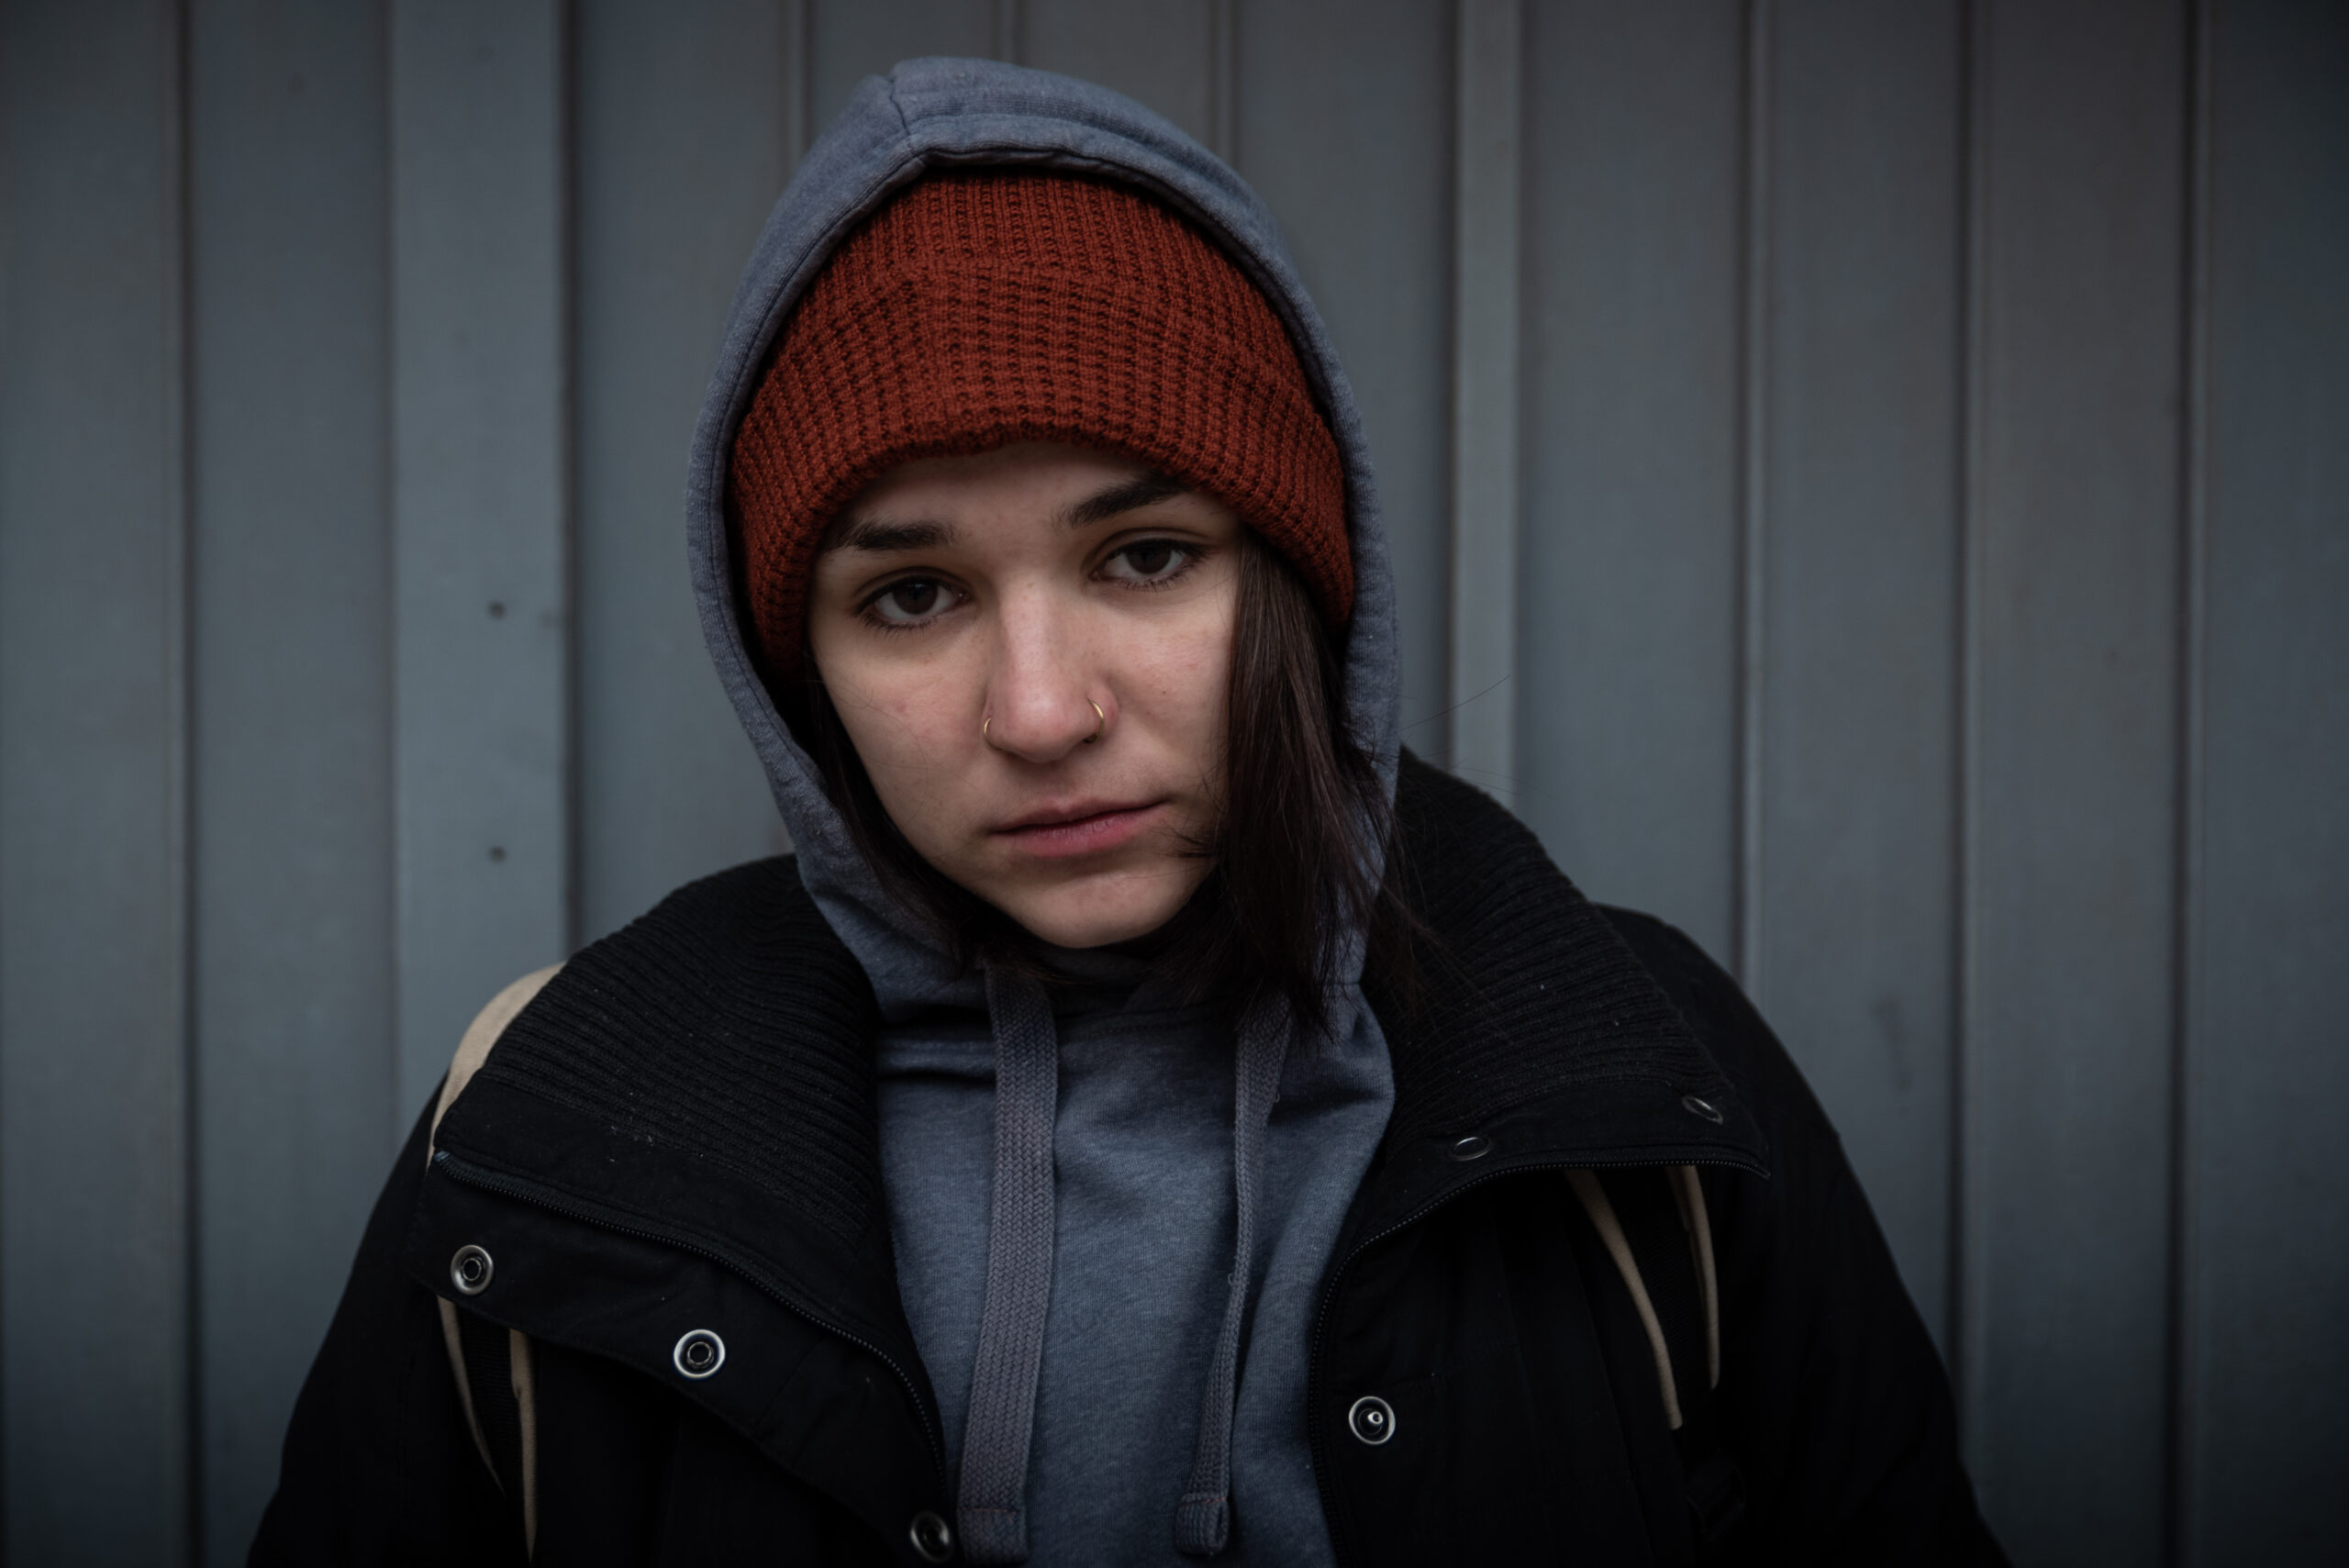 Young homeless woman looking sad